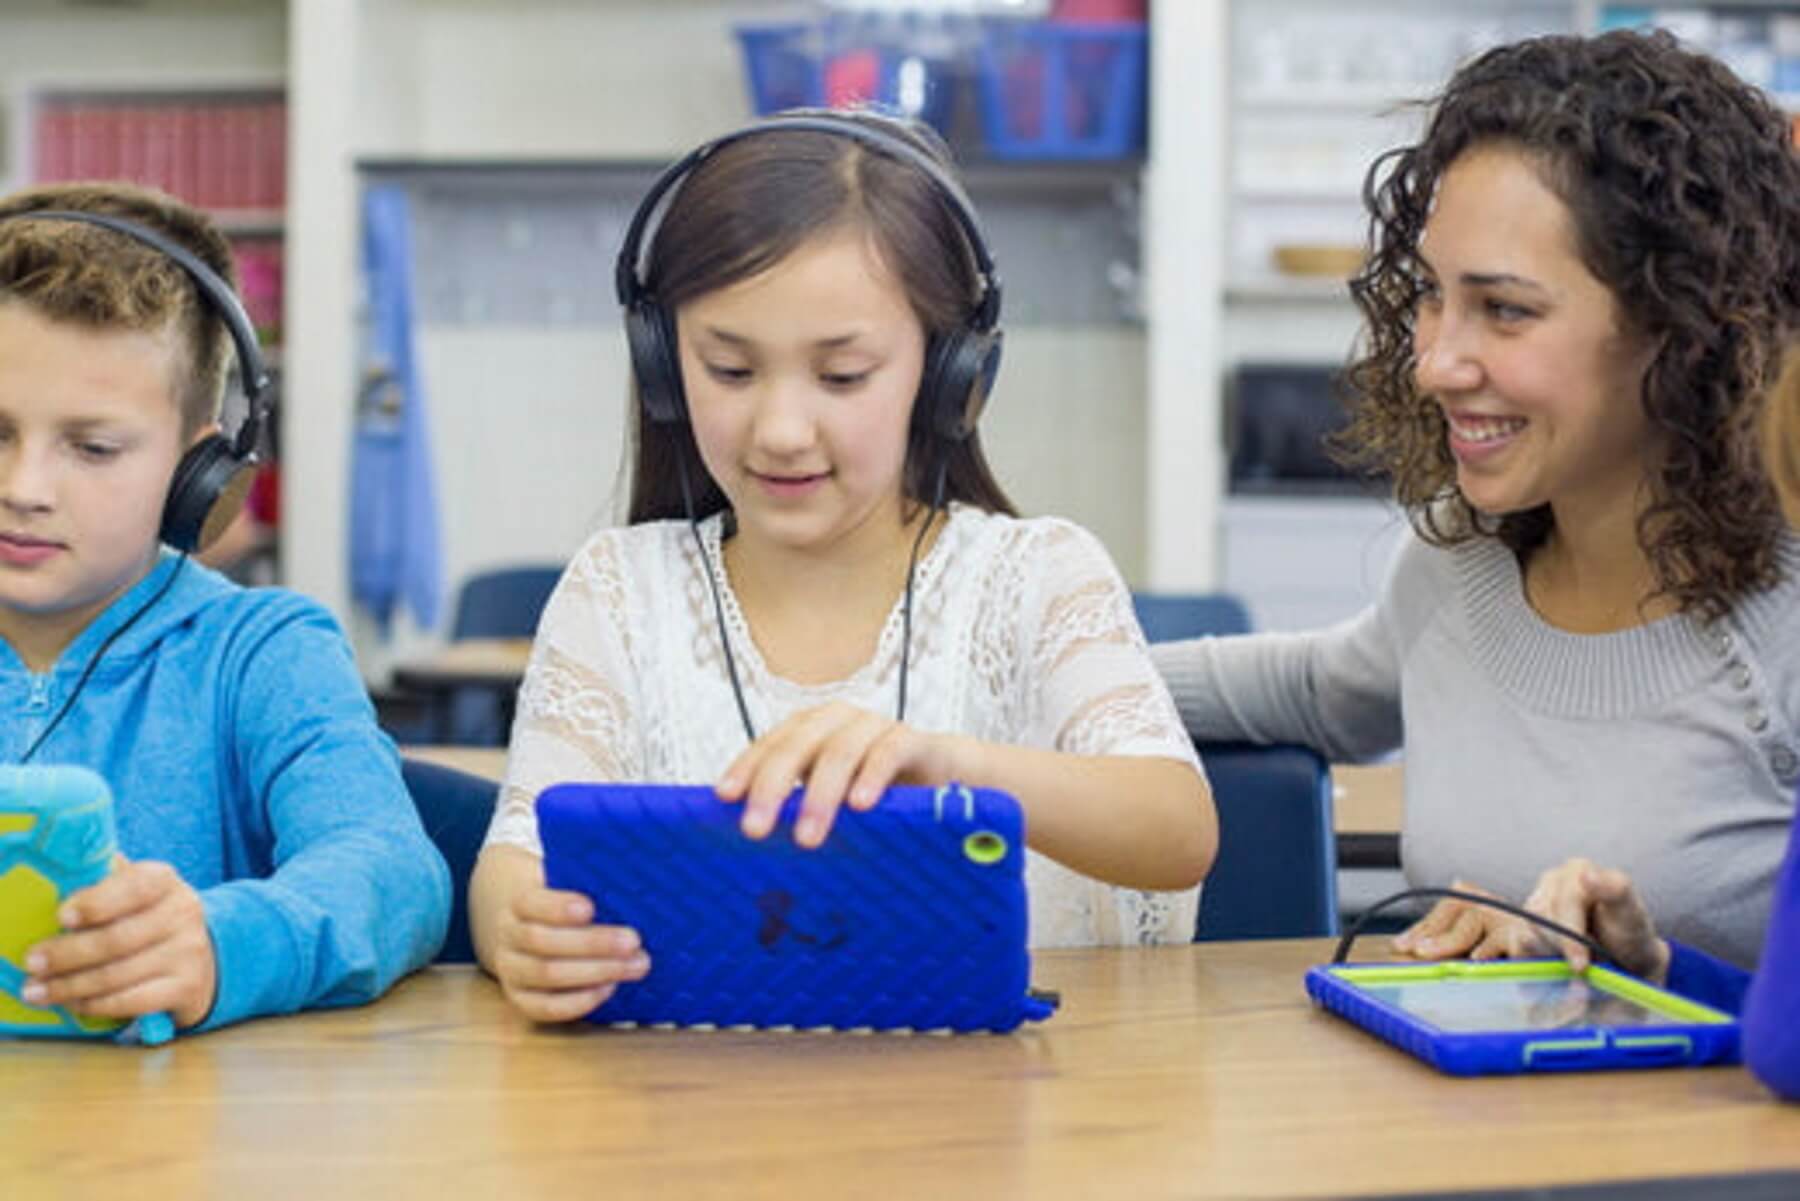 Make learning more fun with these headphones that help students stay focused and engaged. Specially designed to meet educational needs, they can also be used for other applications!